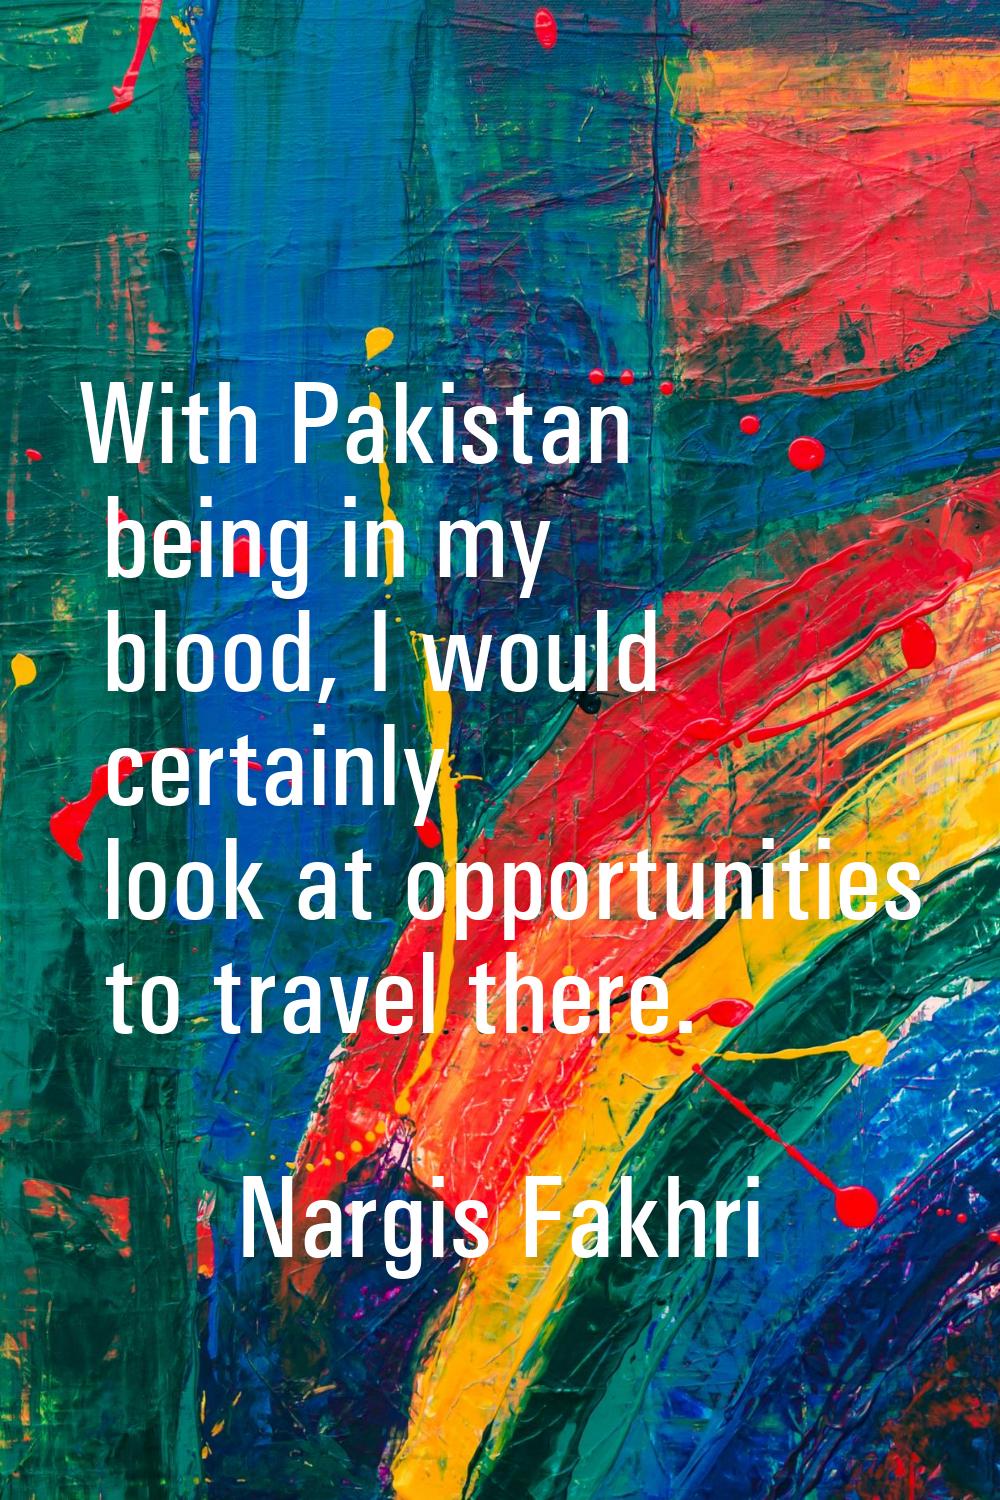 With Pakistan being in my blood, I would certainly look at opportunities to travel there.